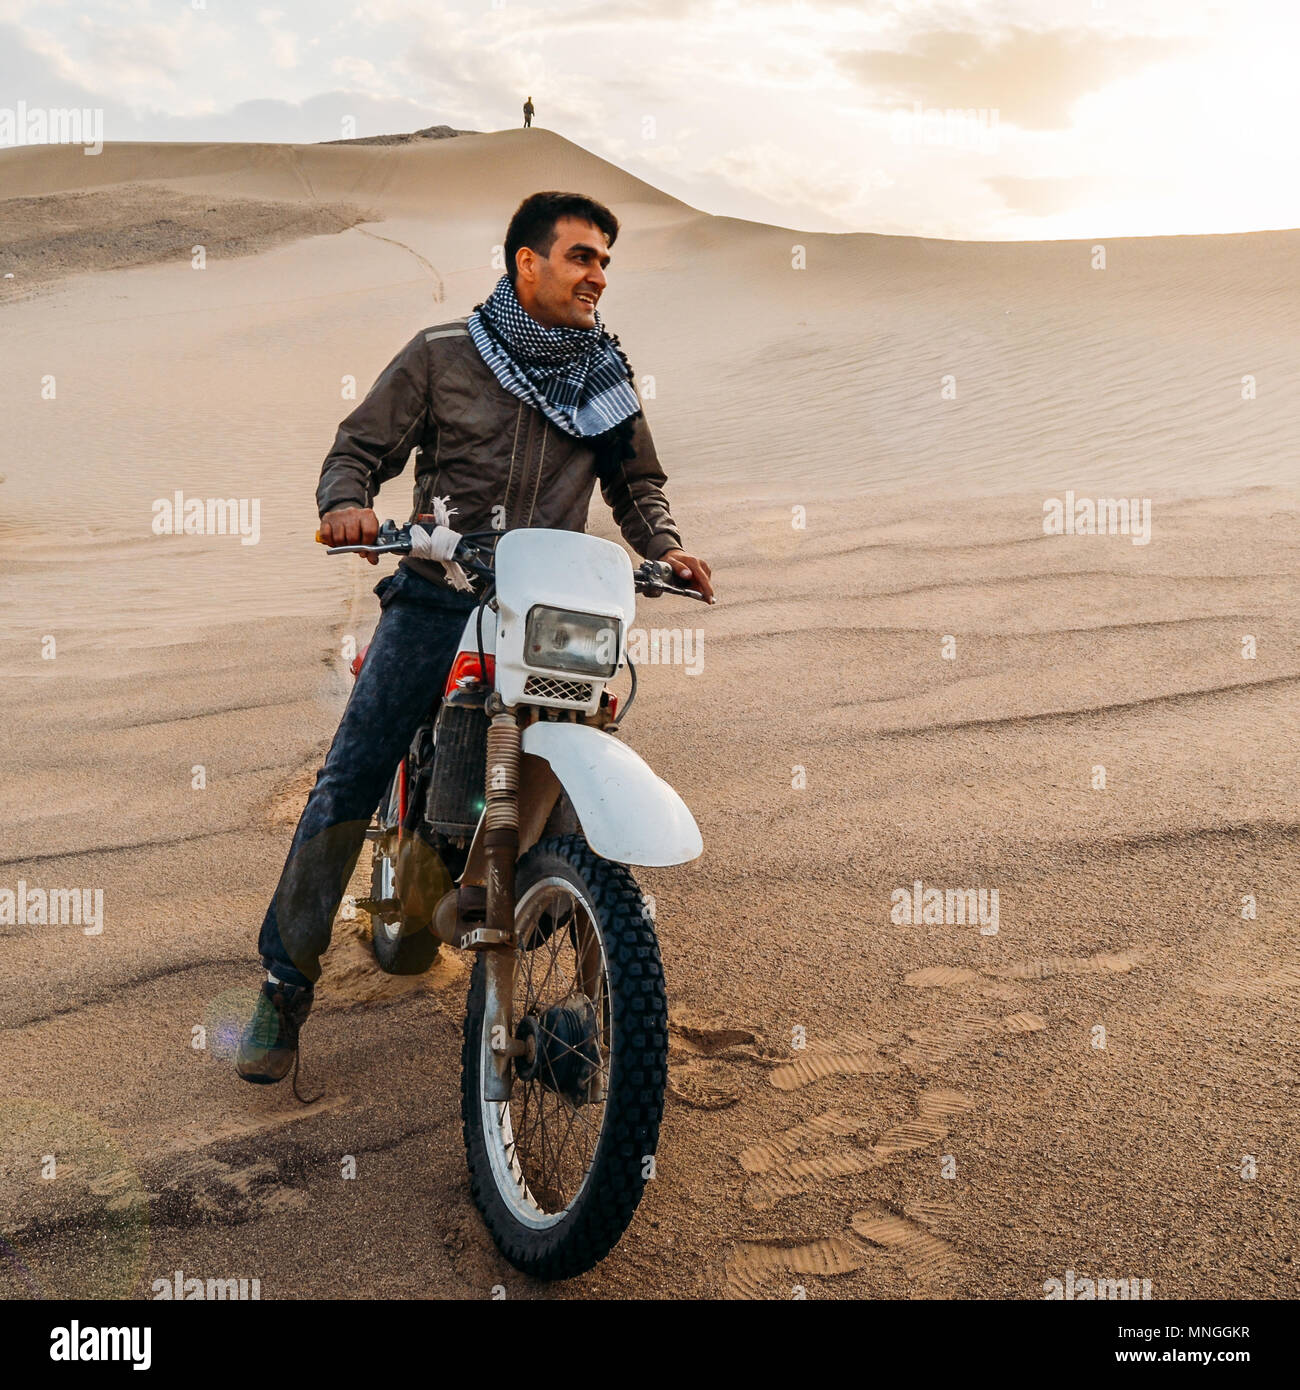 Dasht-e-Lut, Iran - April 25, 2018: Illustrative editorial of a young man on a motorcycle posing at Dasht-e-Lut, a large salt desert located in the pr Stock Photo